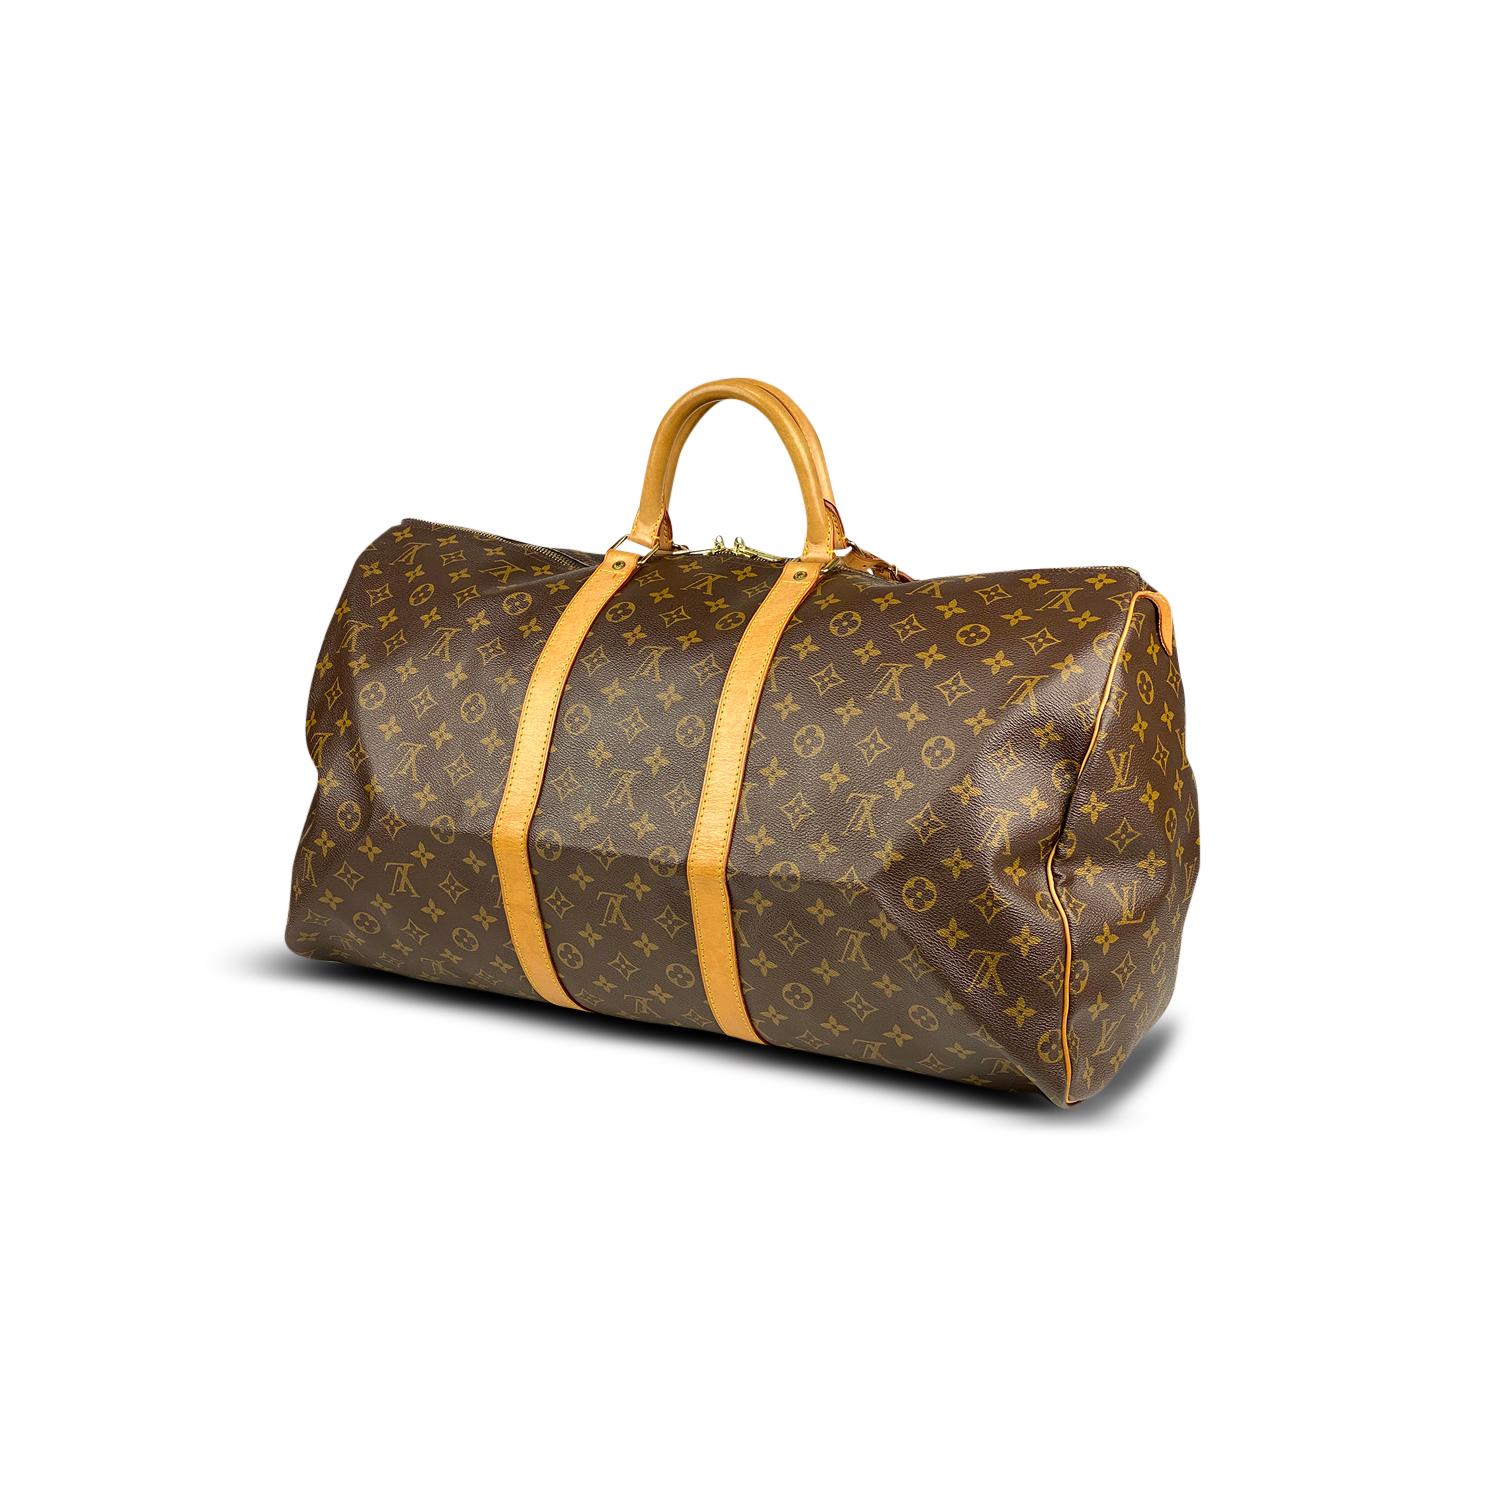 Louis Vuitton Keepall Monogram 55 In Good Condition For Sale In Sundbyberg, SE